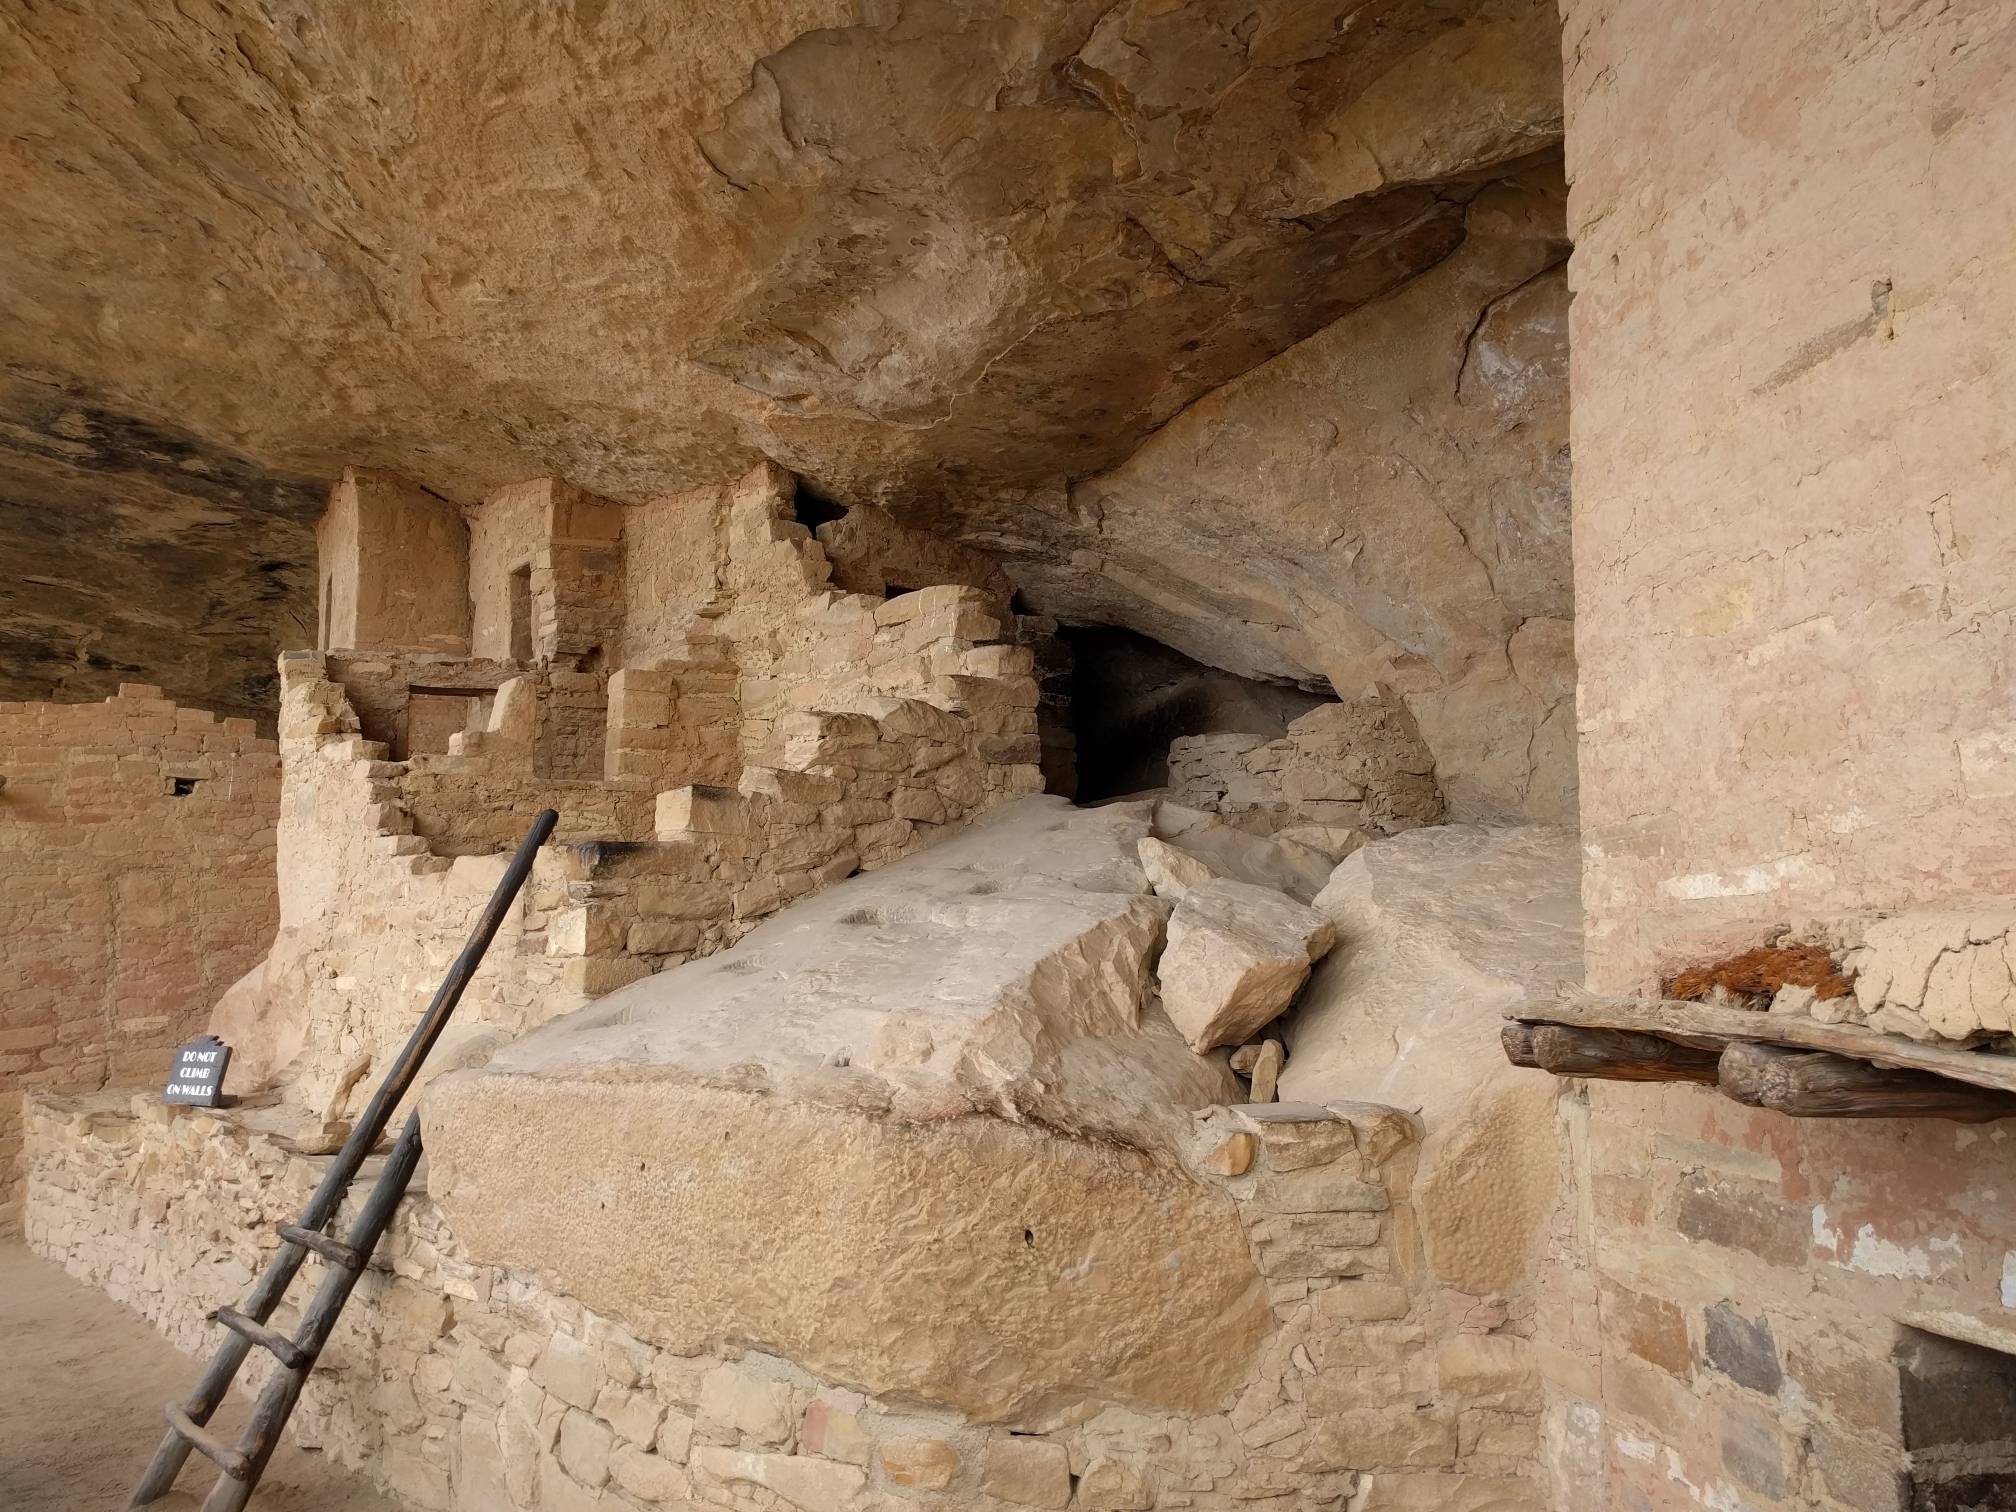 Image: A two-store building in the northern part of the Balcony House cliff dwelling complex. Balcony House is located inside an alcove in the west side of the Soda Canyon. There is no self-guided option for the Balcony House either, but there were thankfully still tickets available.